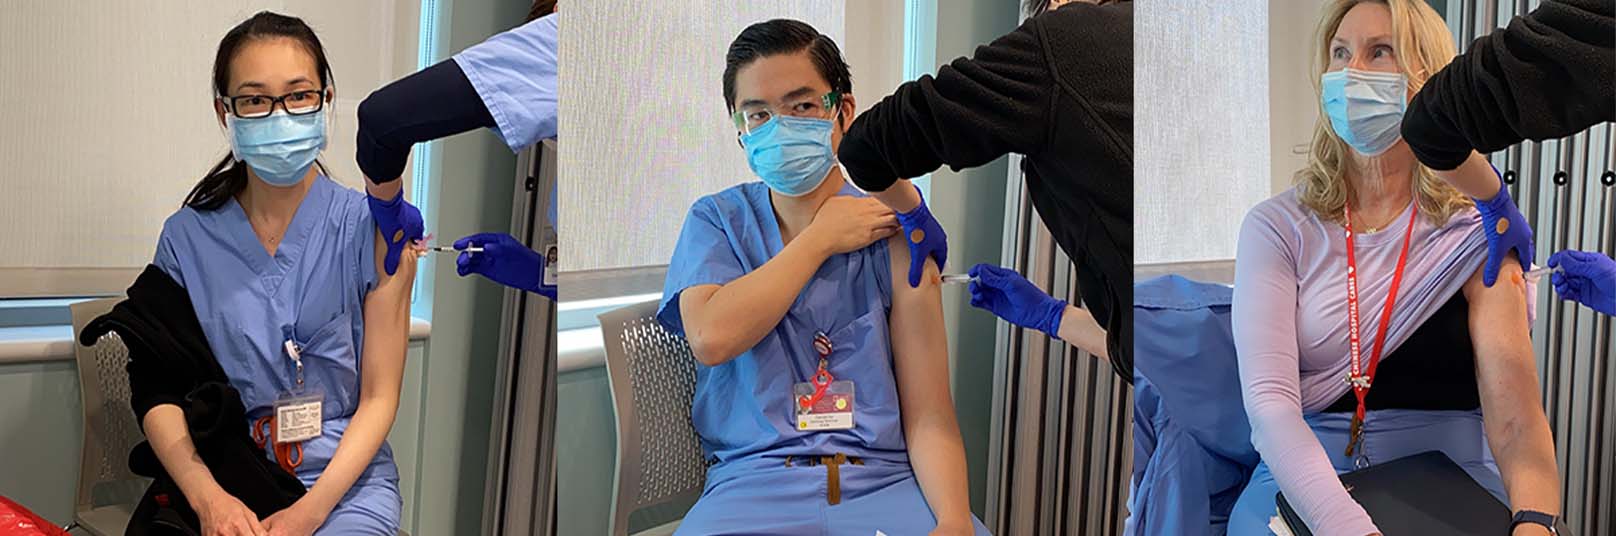 Chinese Hospital vaccinates its frontline healthcare workers against COVID-19